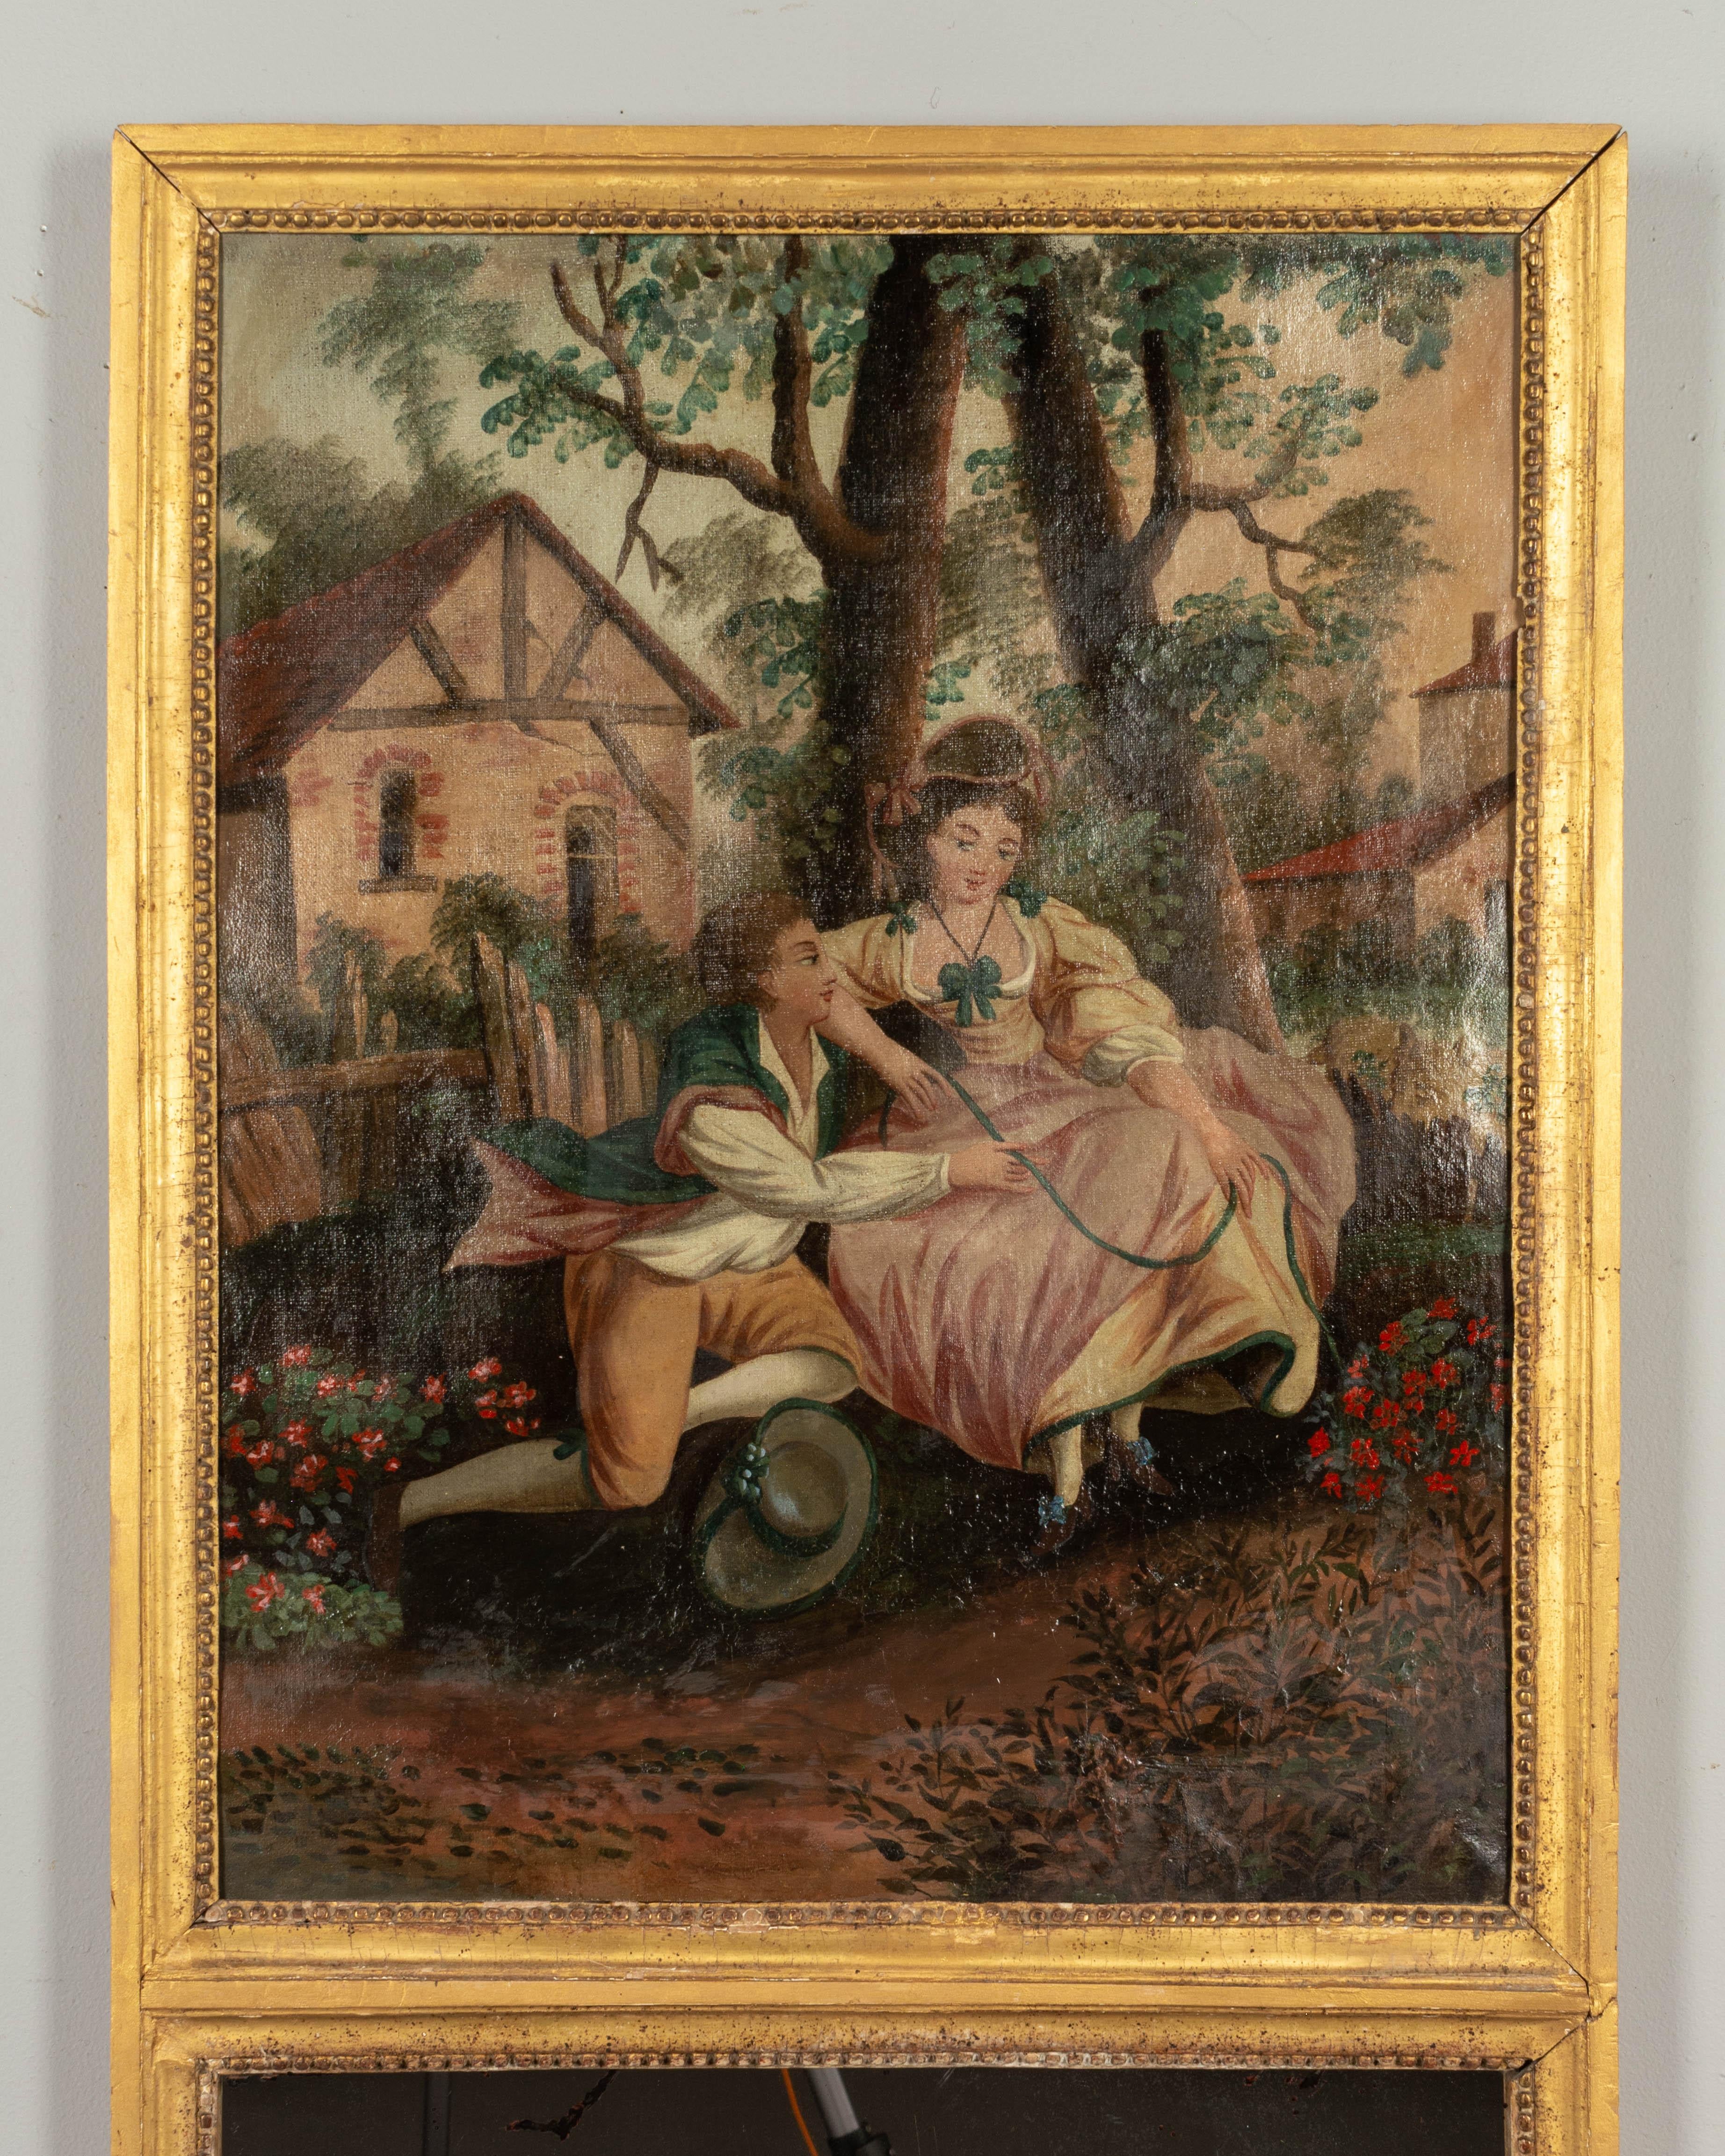 A late 18th century French Louis XV style trumeau mirror. Fine oil painting depicting a courting couple in a garden setting with a country cottage in the background. Giltwood frame with beaded border trim. Original mirror with old silvering.